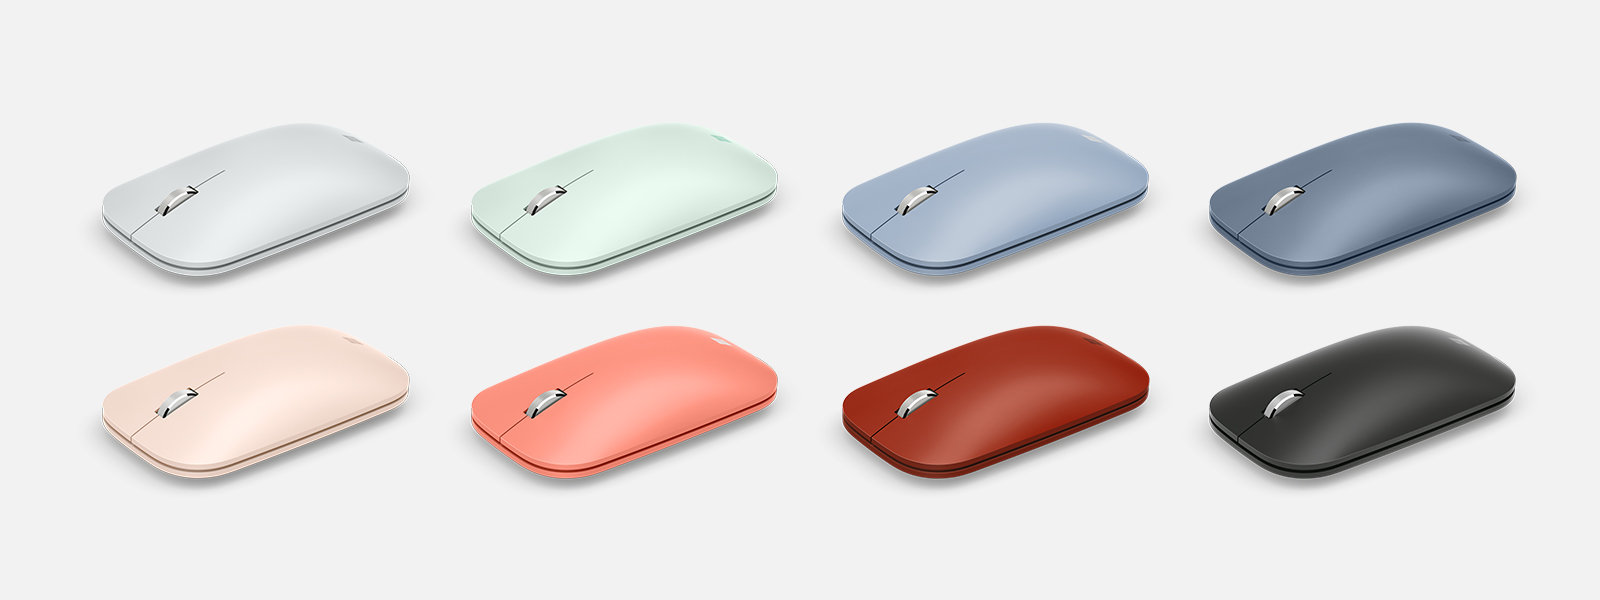 Microsoft Modern Mobile Mouse in many different colors.